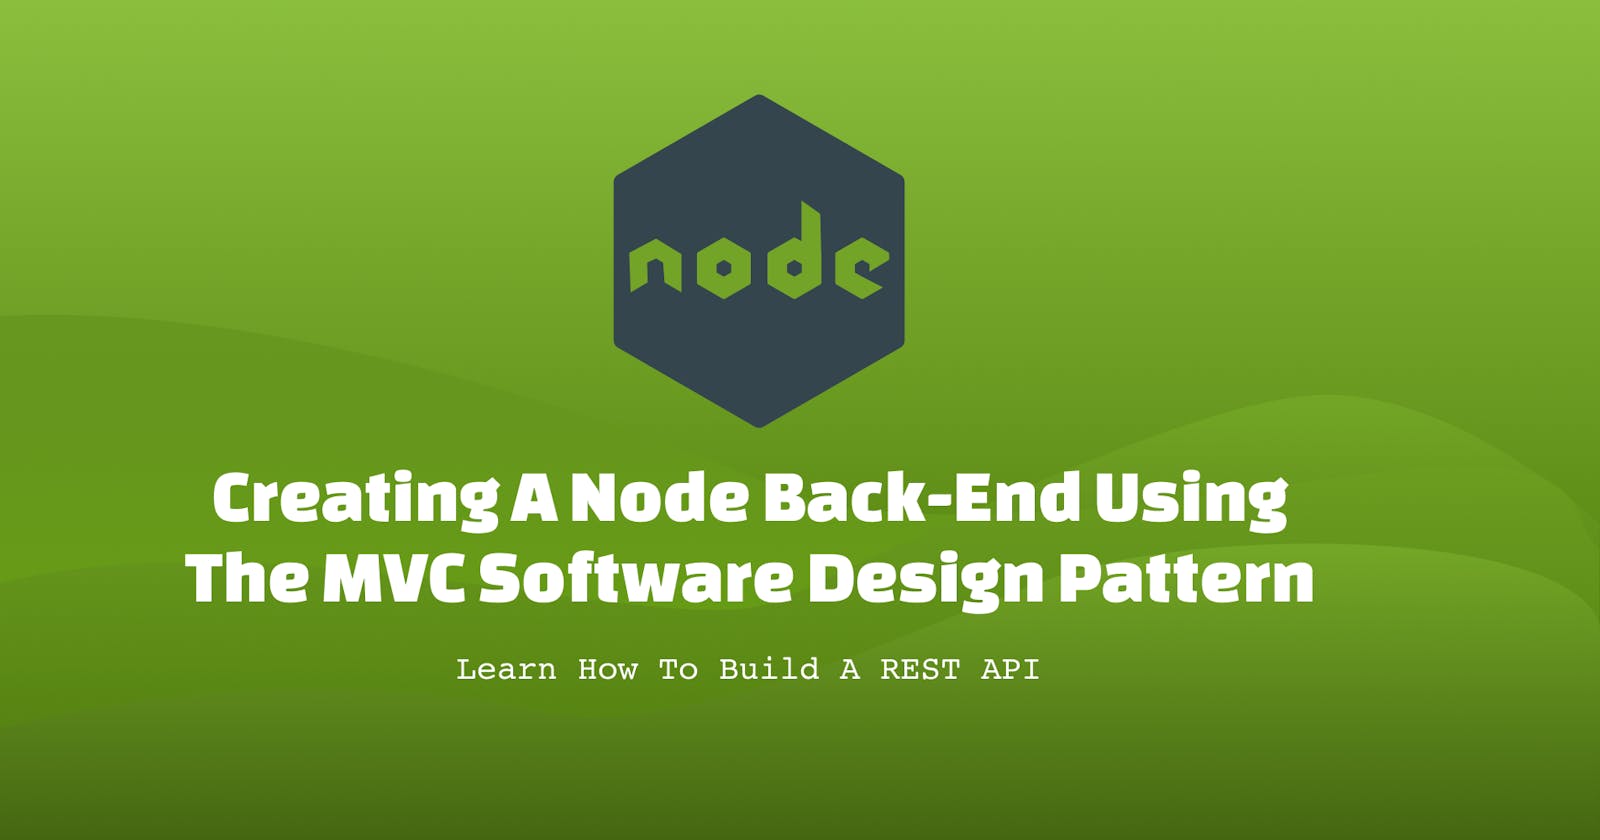 Creating a Node back-end using the MVC software design pattern